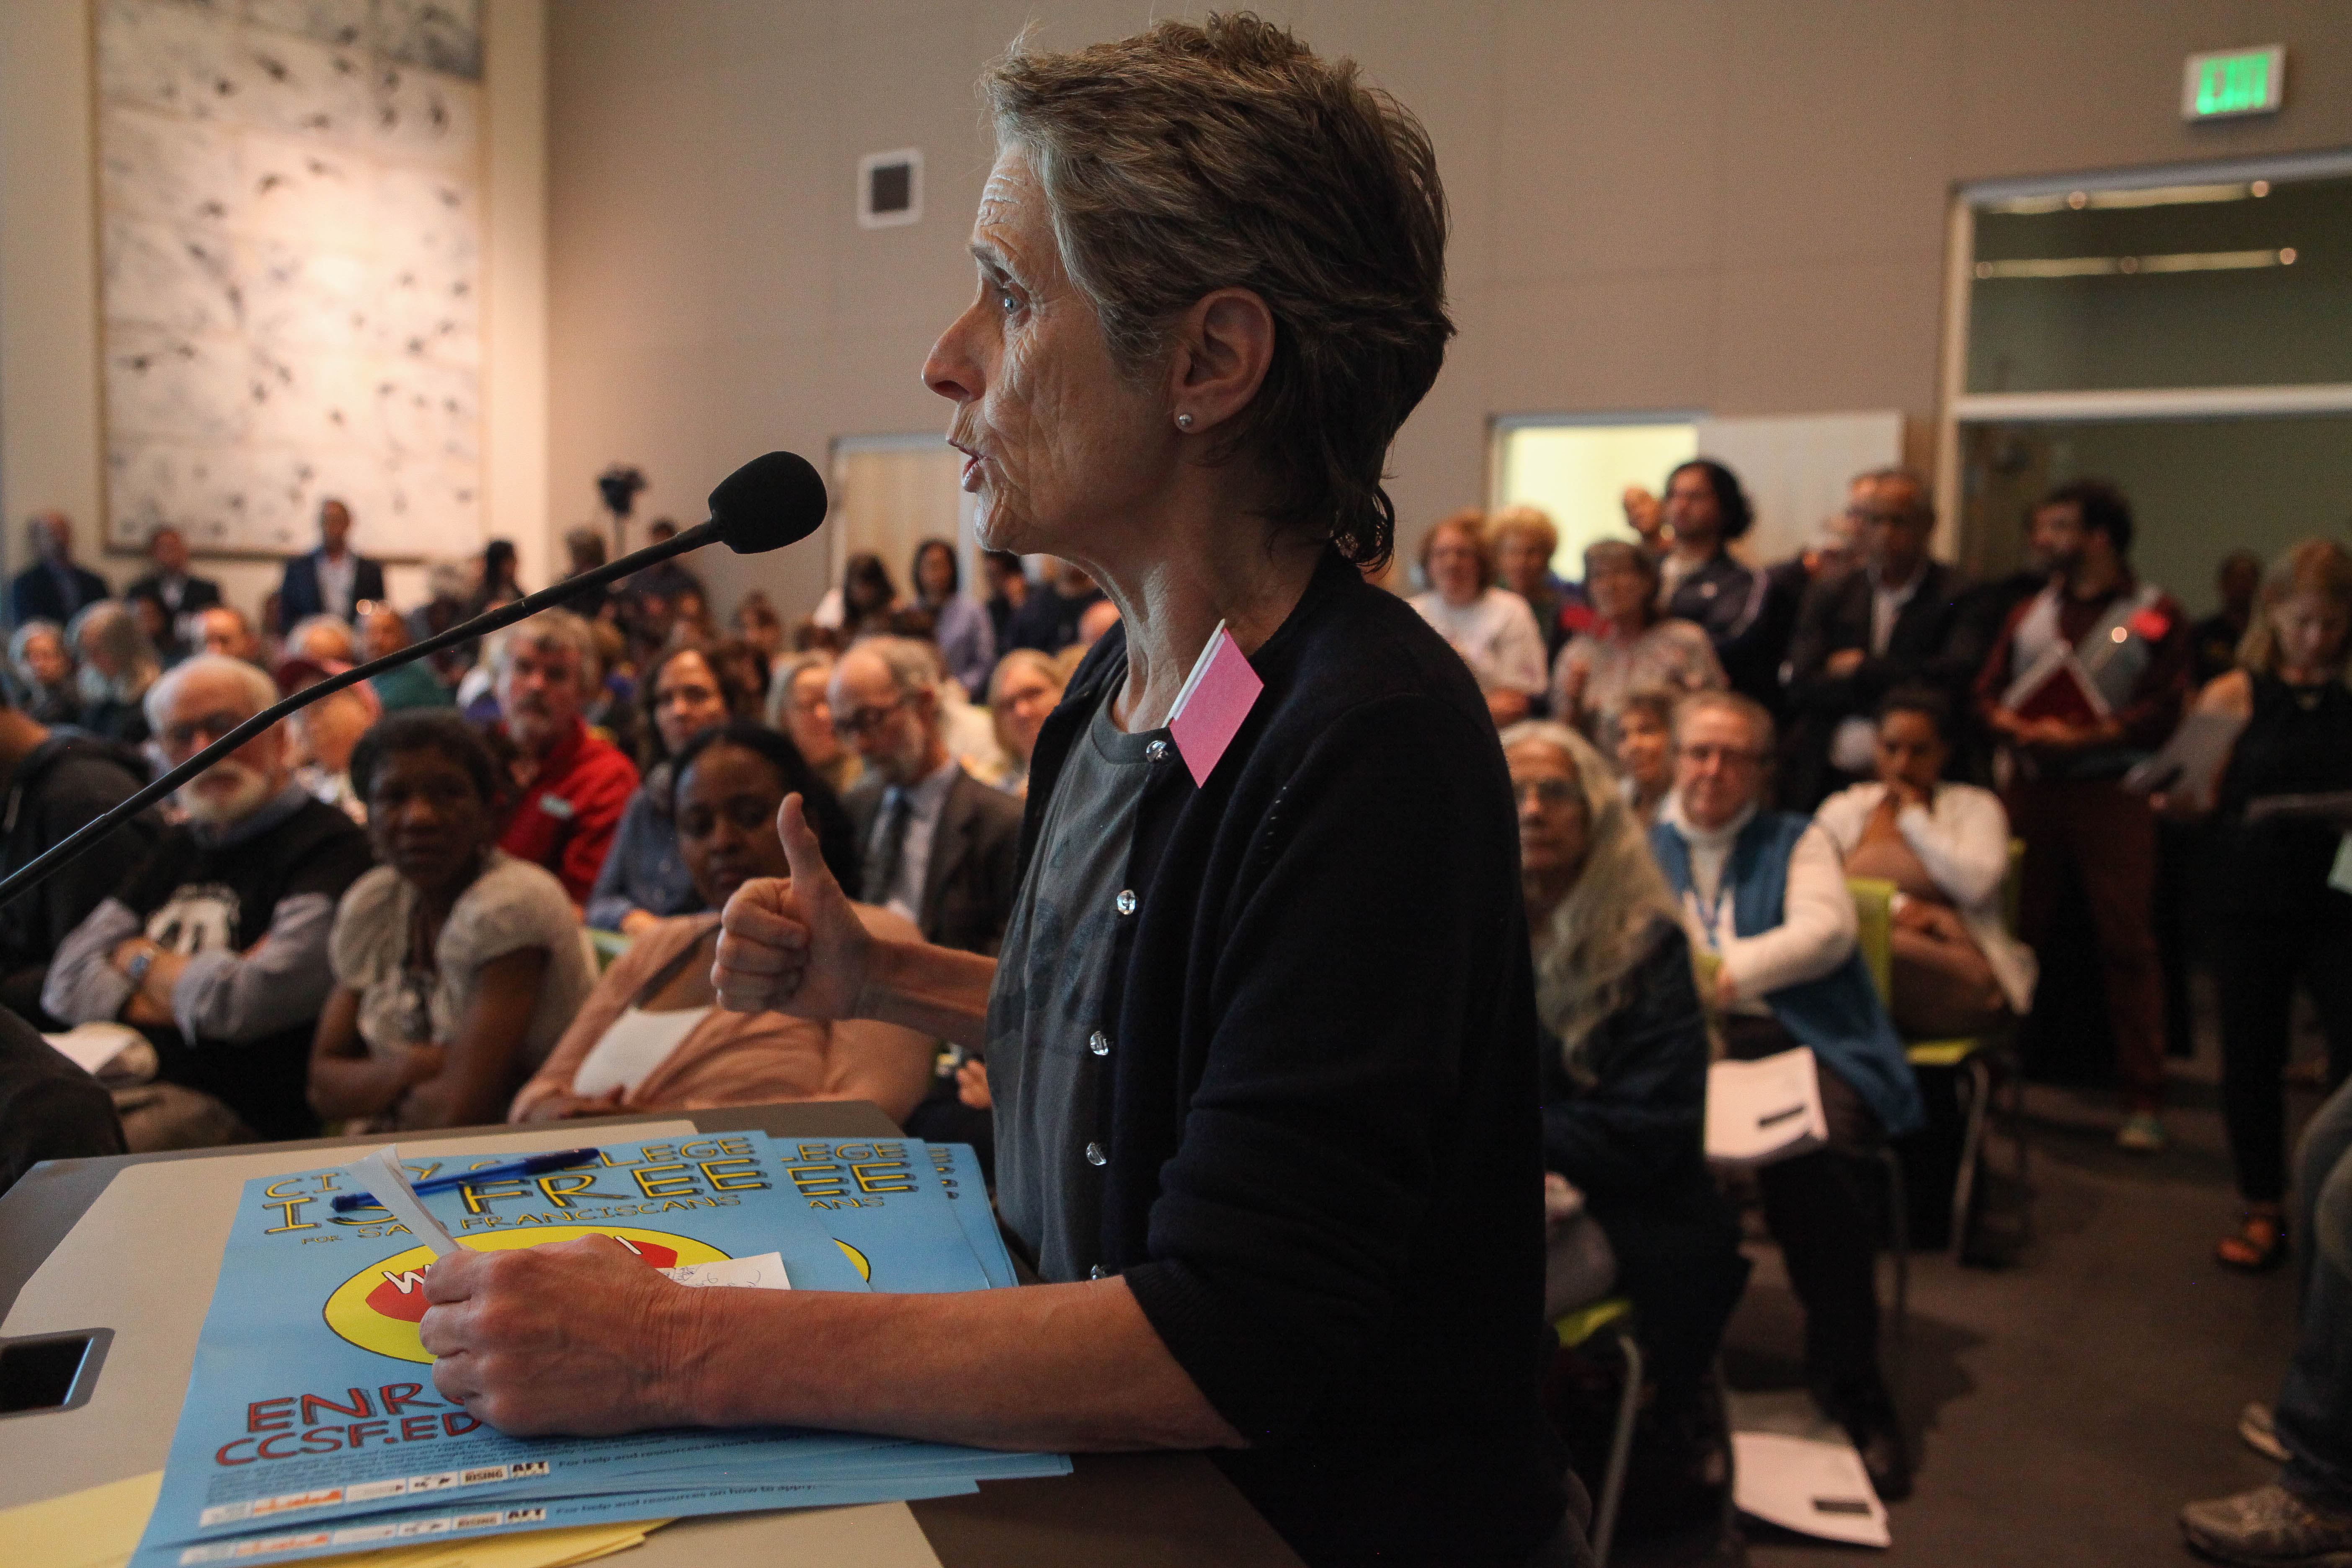 AFT member Kathe Burick emotionally voices her opposition of a controversial chancellor at City College of San Francsico's Board of Trustees meeting on June 22, 2017.